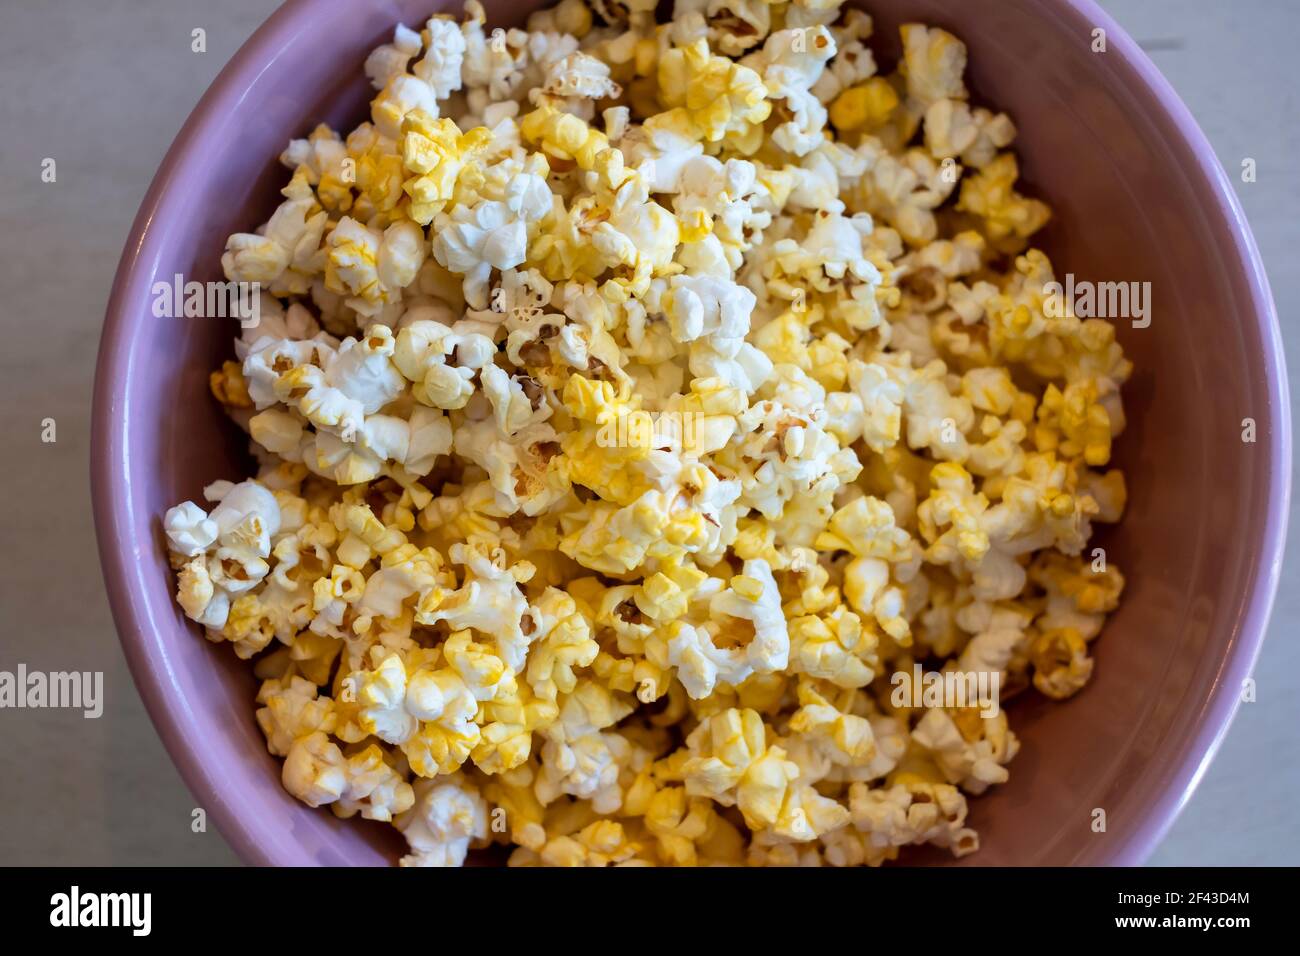 Popcorn, or popped corn, in a pink bowl on a table. Stock Photo